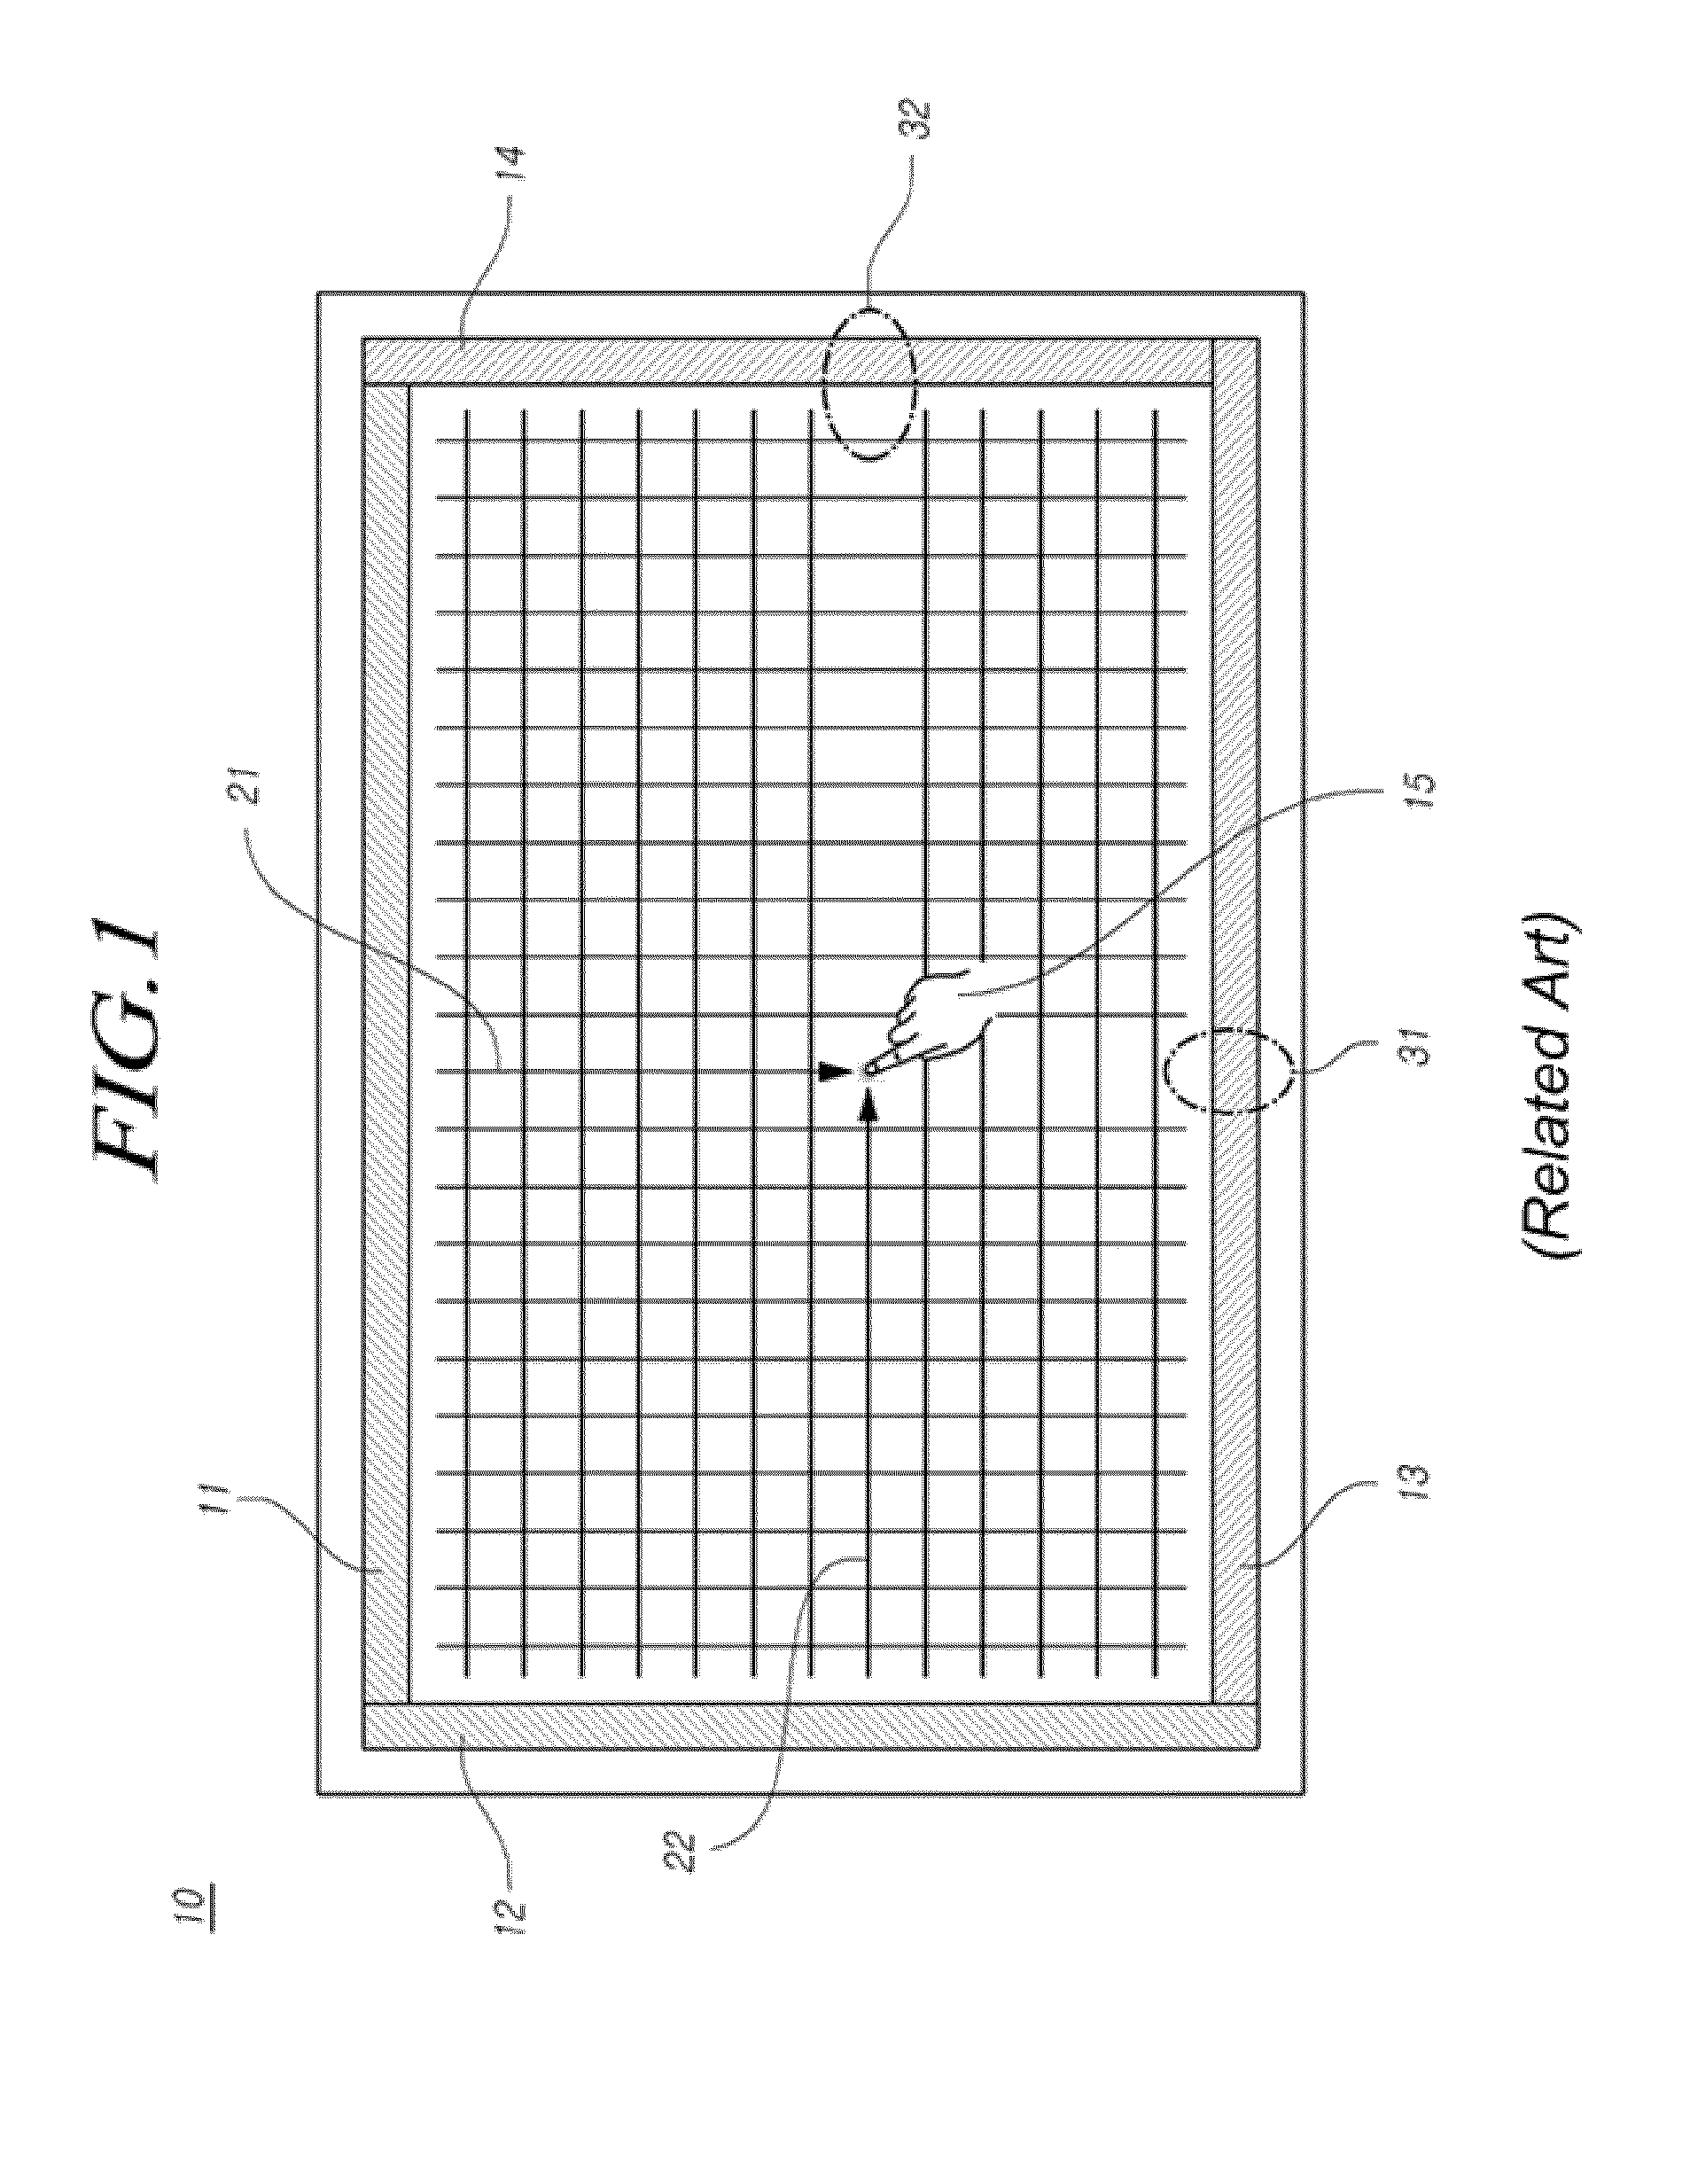 Organic light emitting display device with touch sensing function